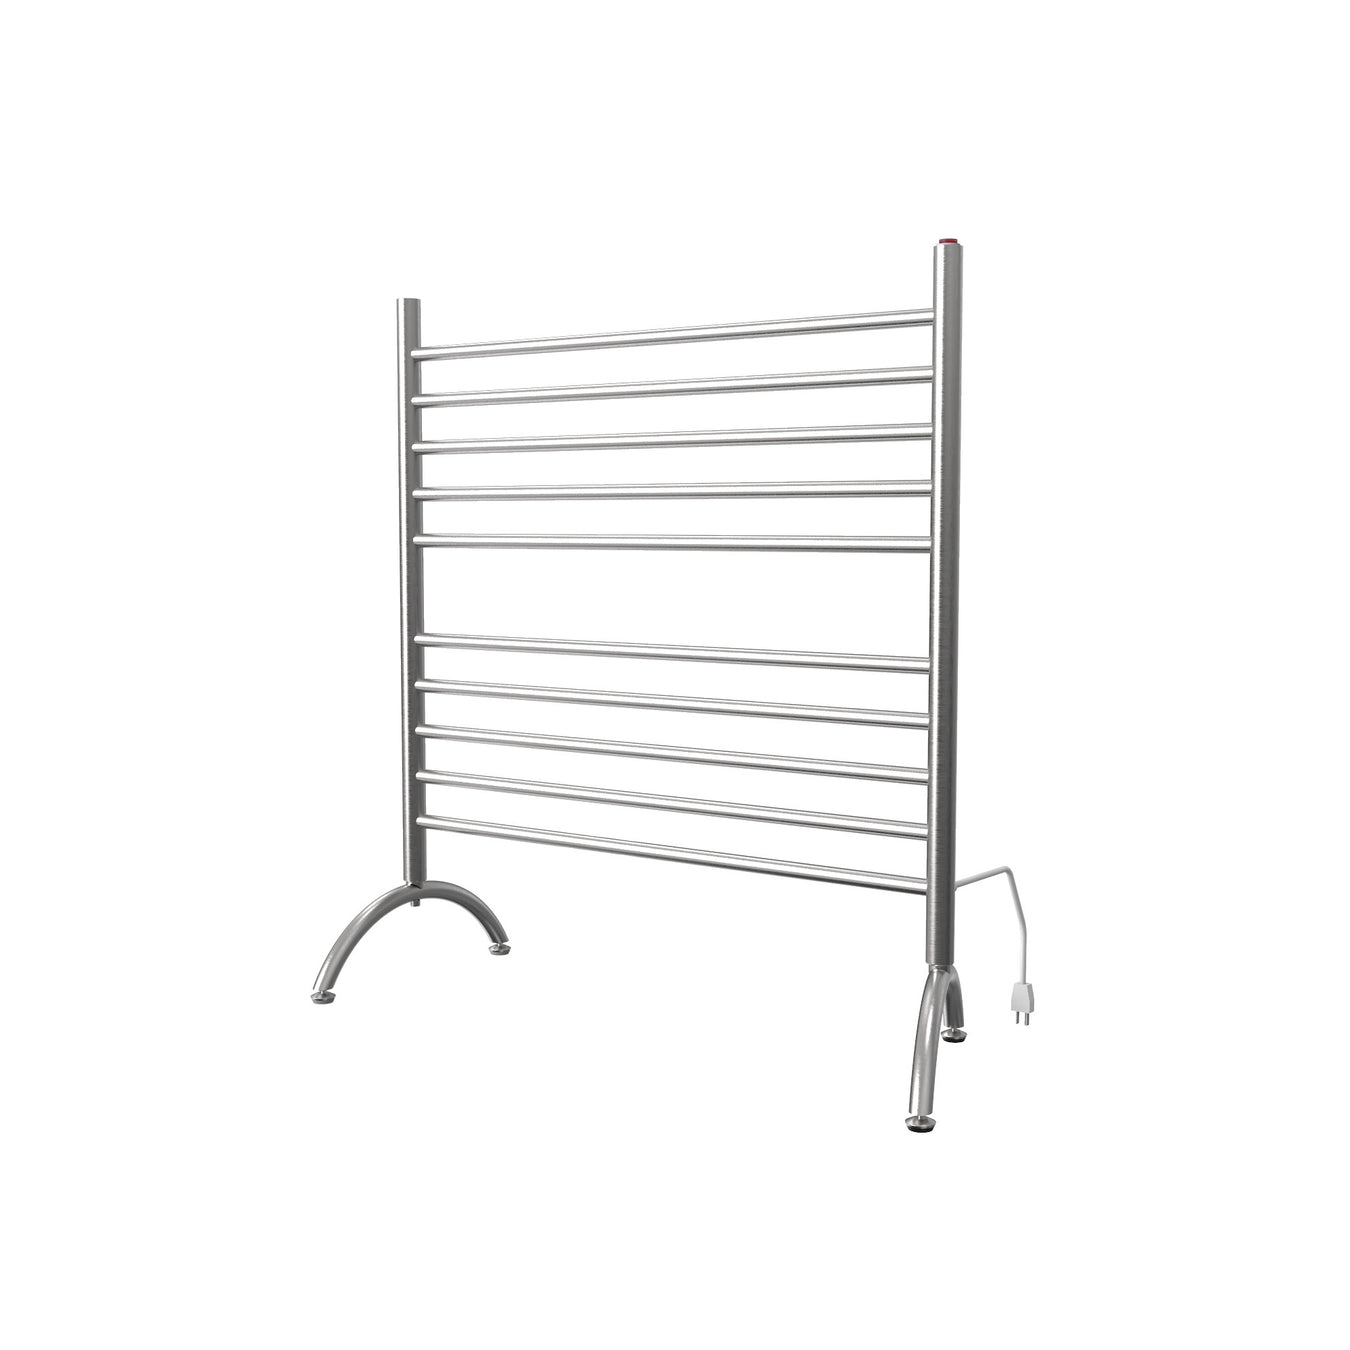 Amba Products Solo Collection SAFS-33 Towel Warmers